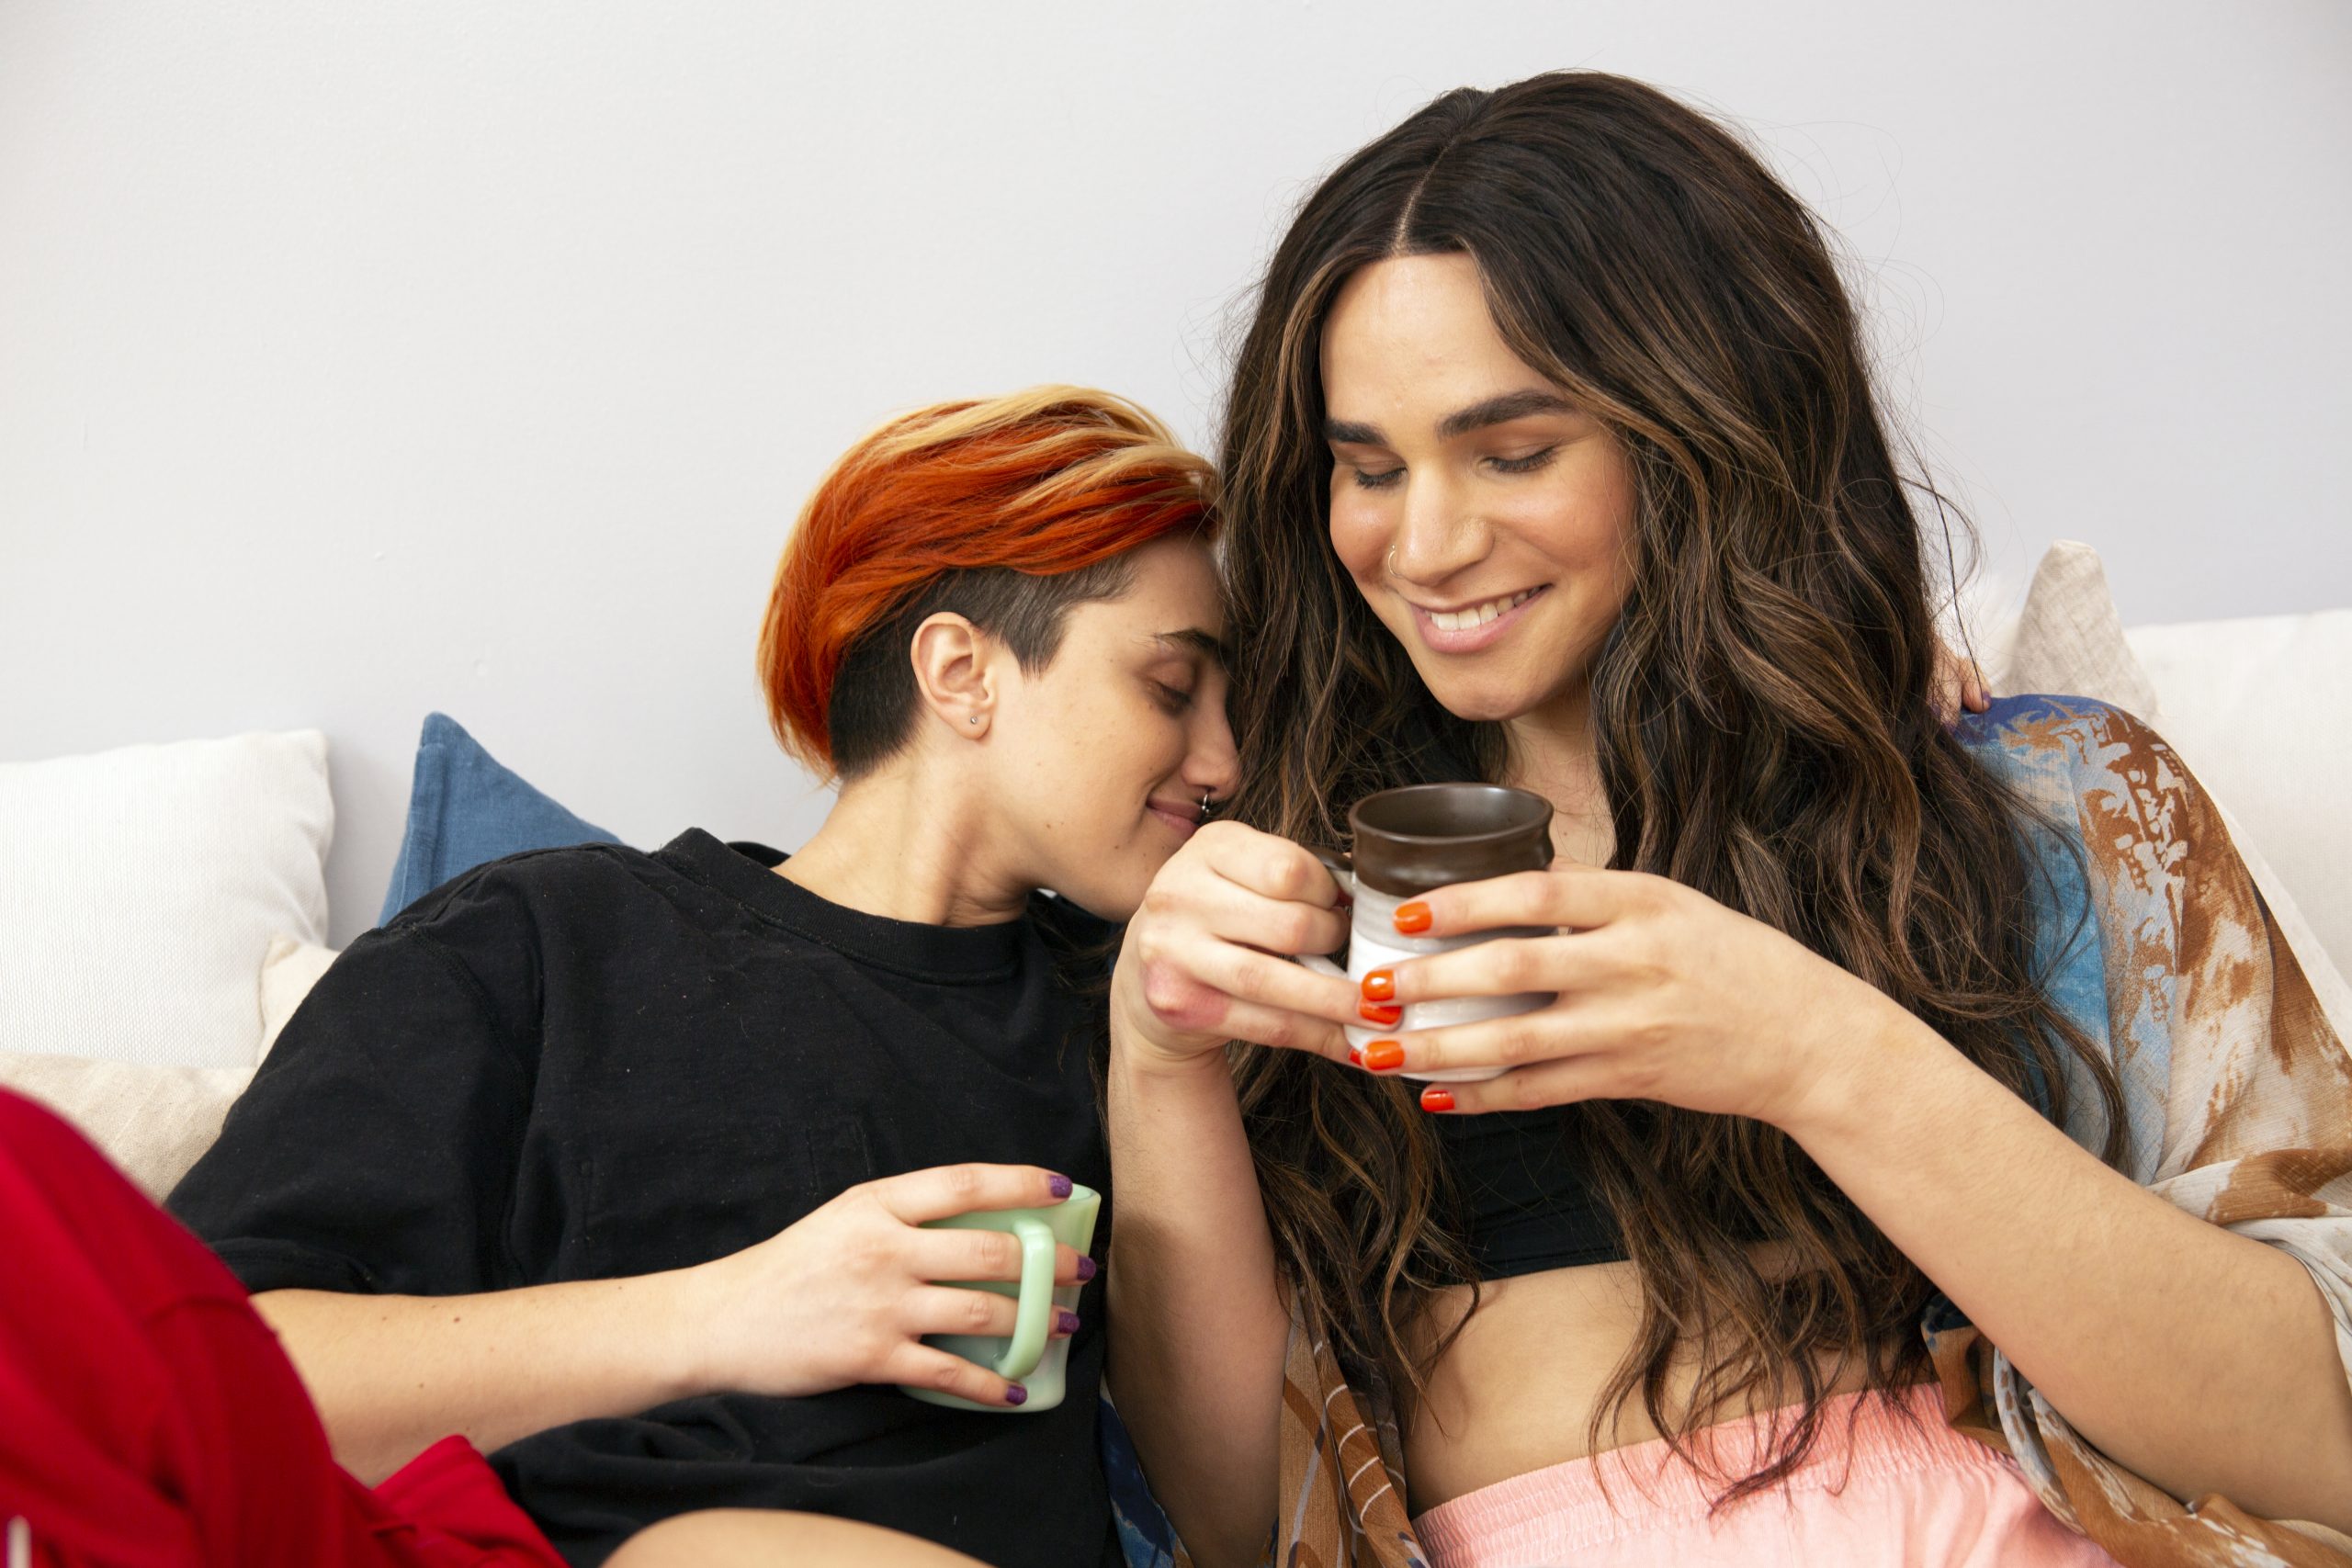 A trans-masculine gender non-conforming person and transfeminine nonbinary person drinking coffee in bed